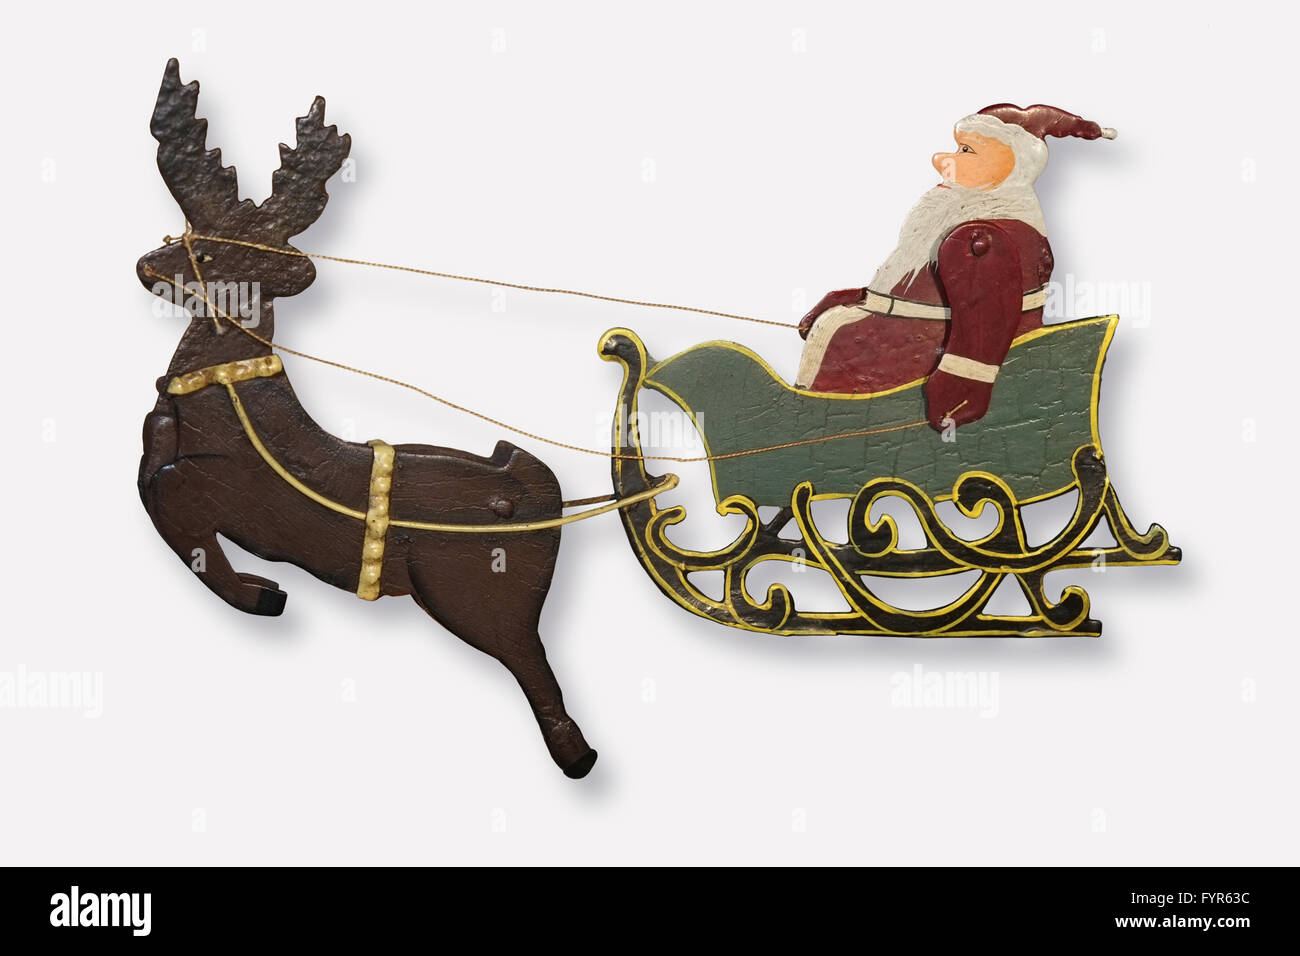 Santa Claus with reindeer and sleigh Stock Photo